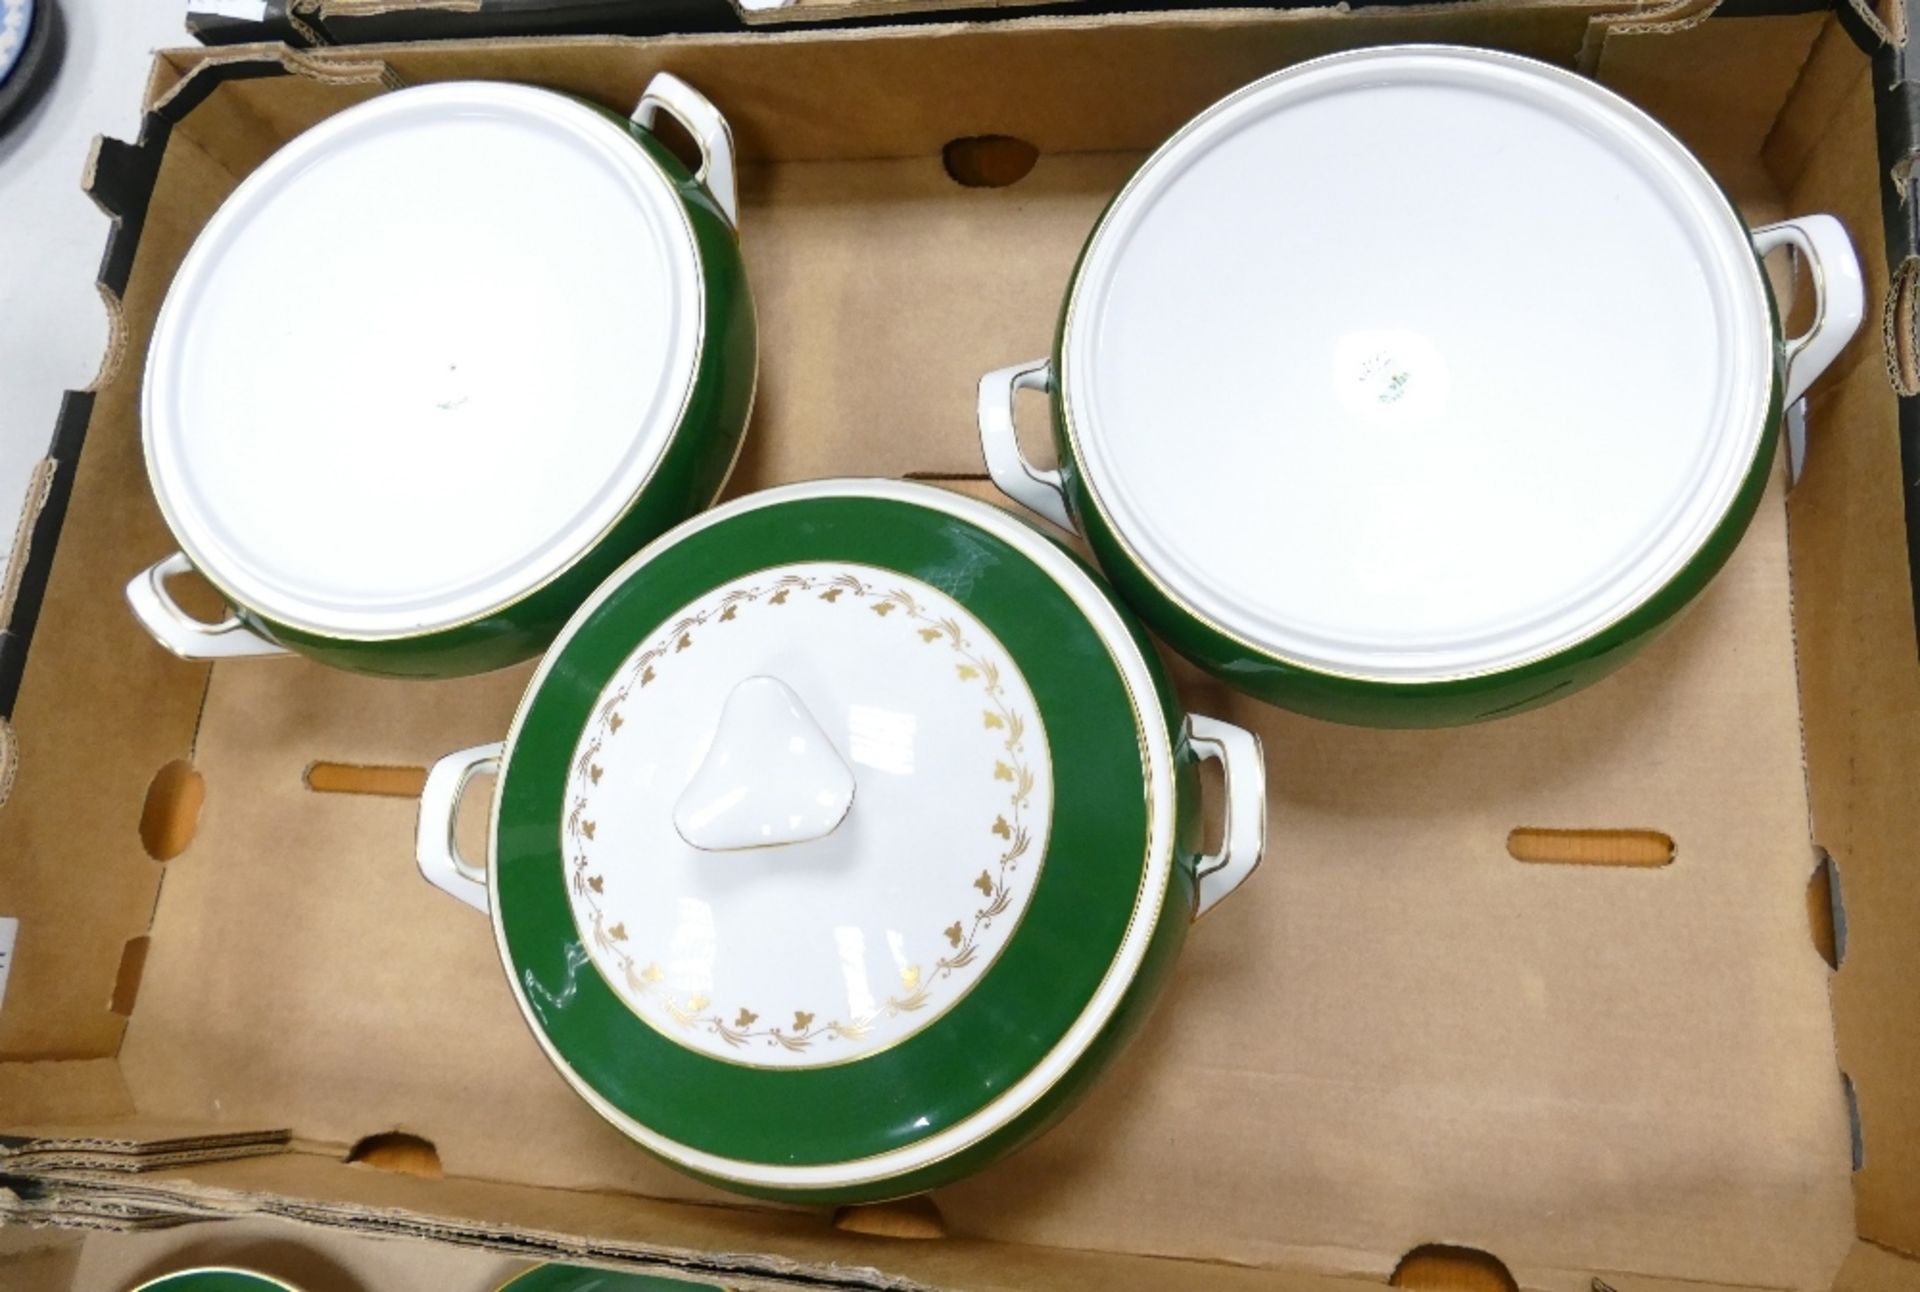 A very large Spode Green Velvet patterned dinner service including gravy boats, tureens, Coffee set, - Image 7 of 8